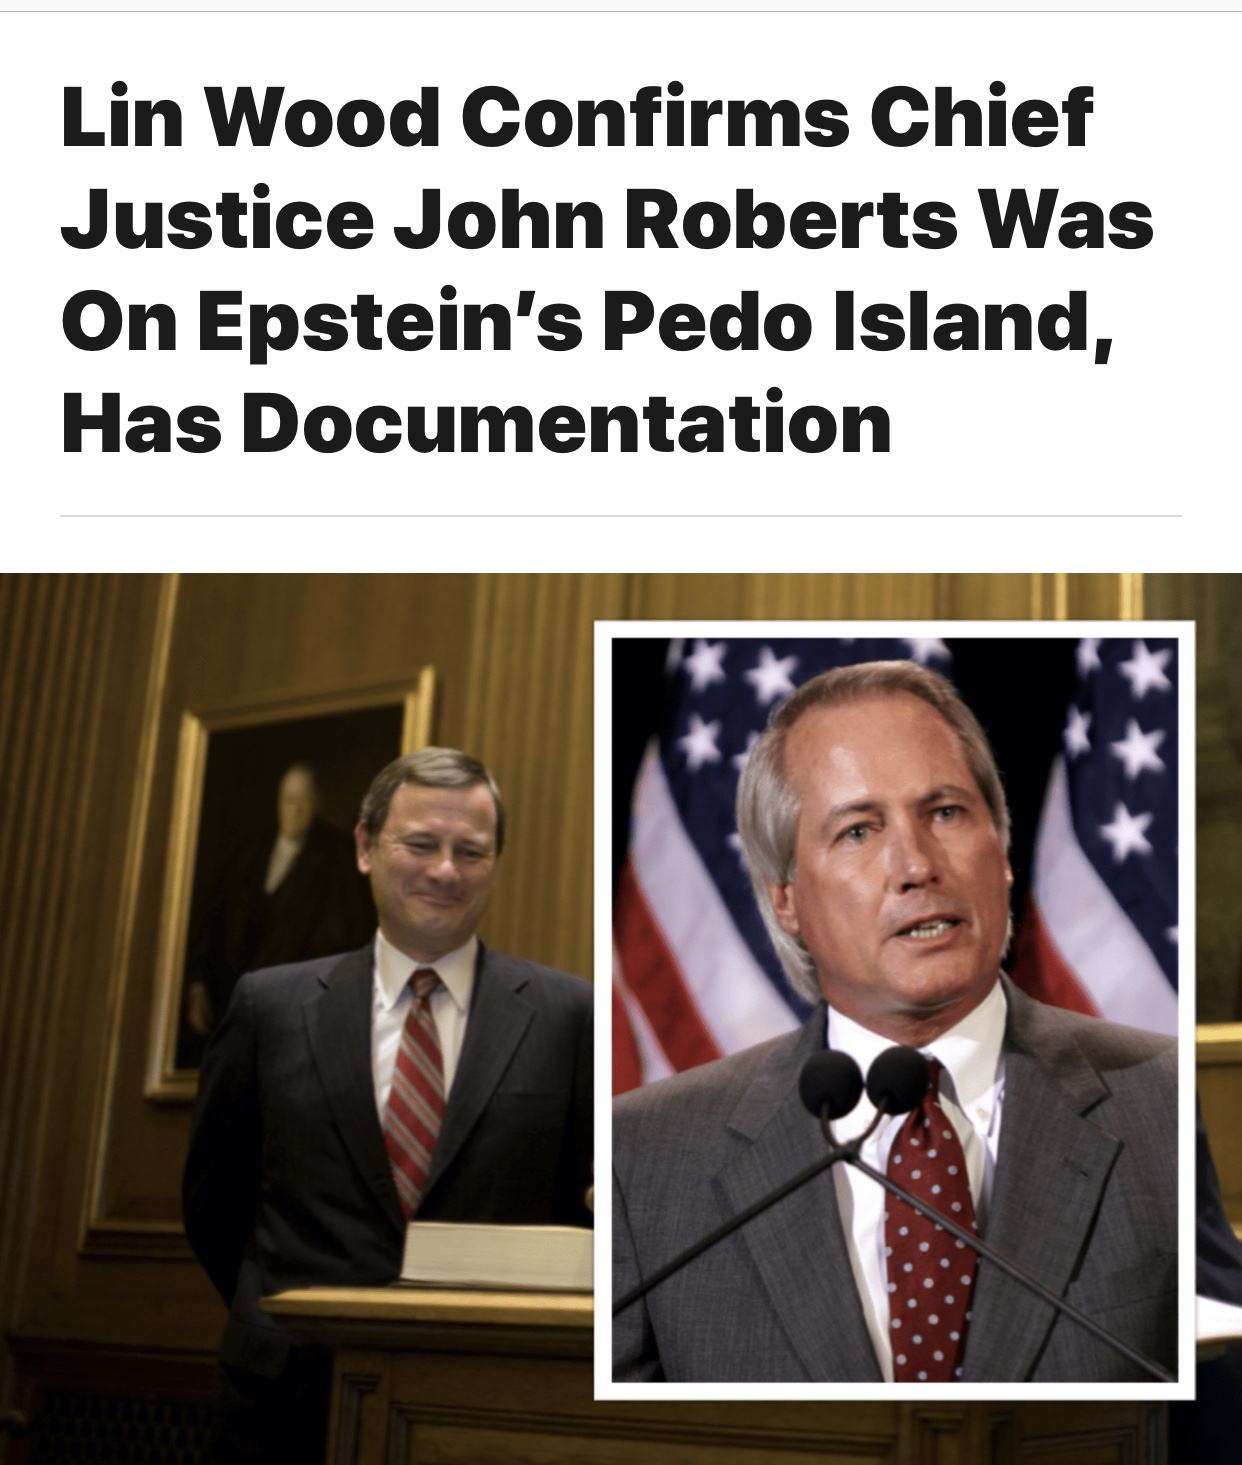 Lin Wood Confirms Chief Justice John Roberts Was On Epstein’s Pedo Island, Has Documentation